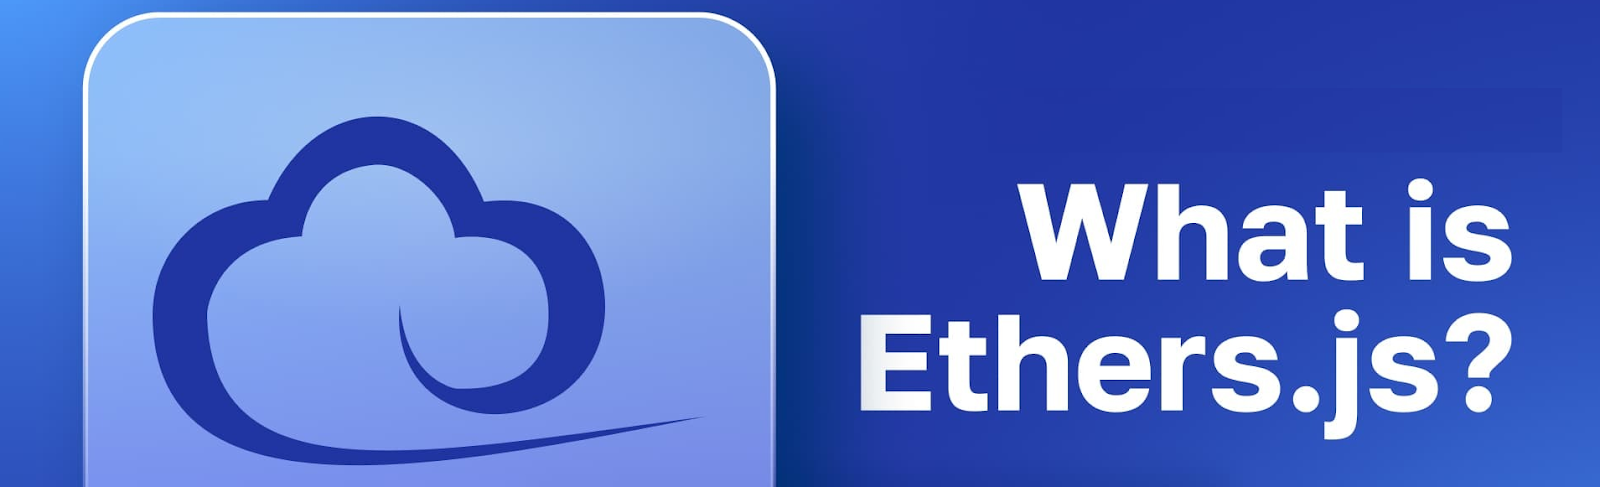 Ethers.js logo and text: "What is Ethers.js"